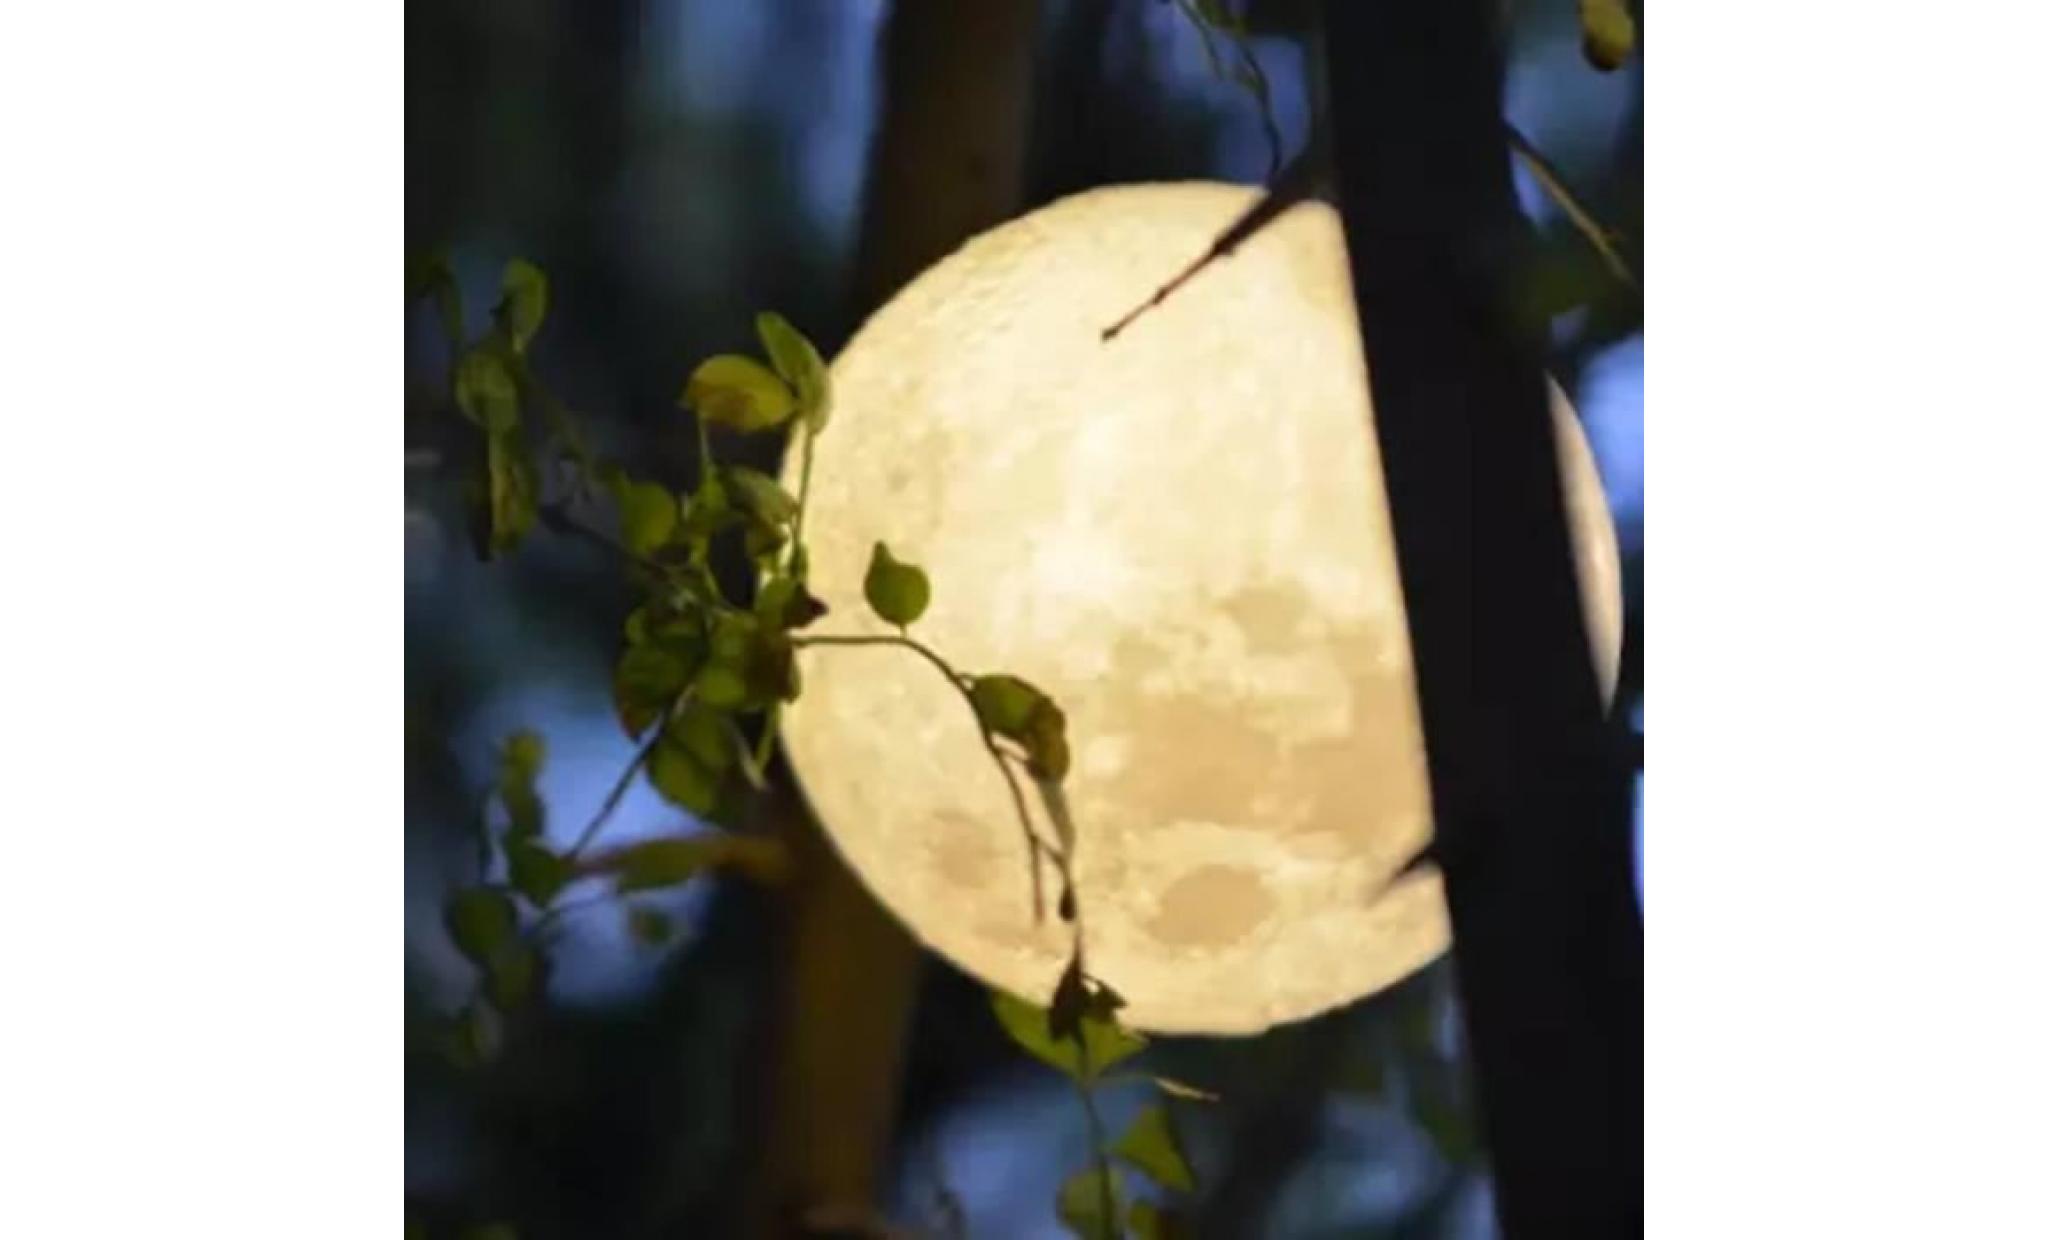 3d usb led magical moon night light moonlight table desk moon lamp gift c paontry1010 pas cher